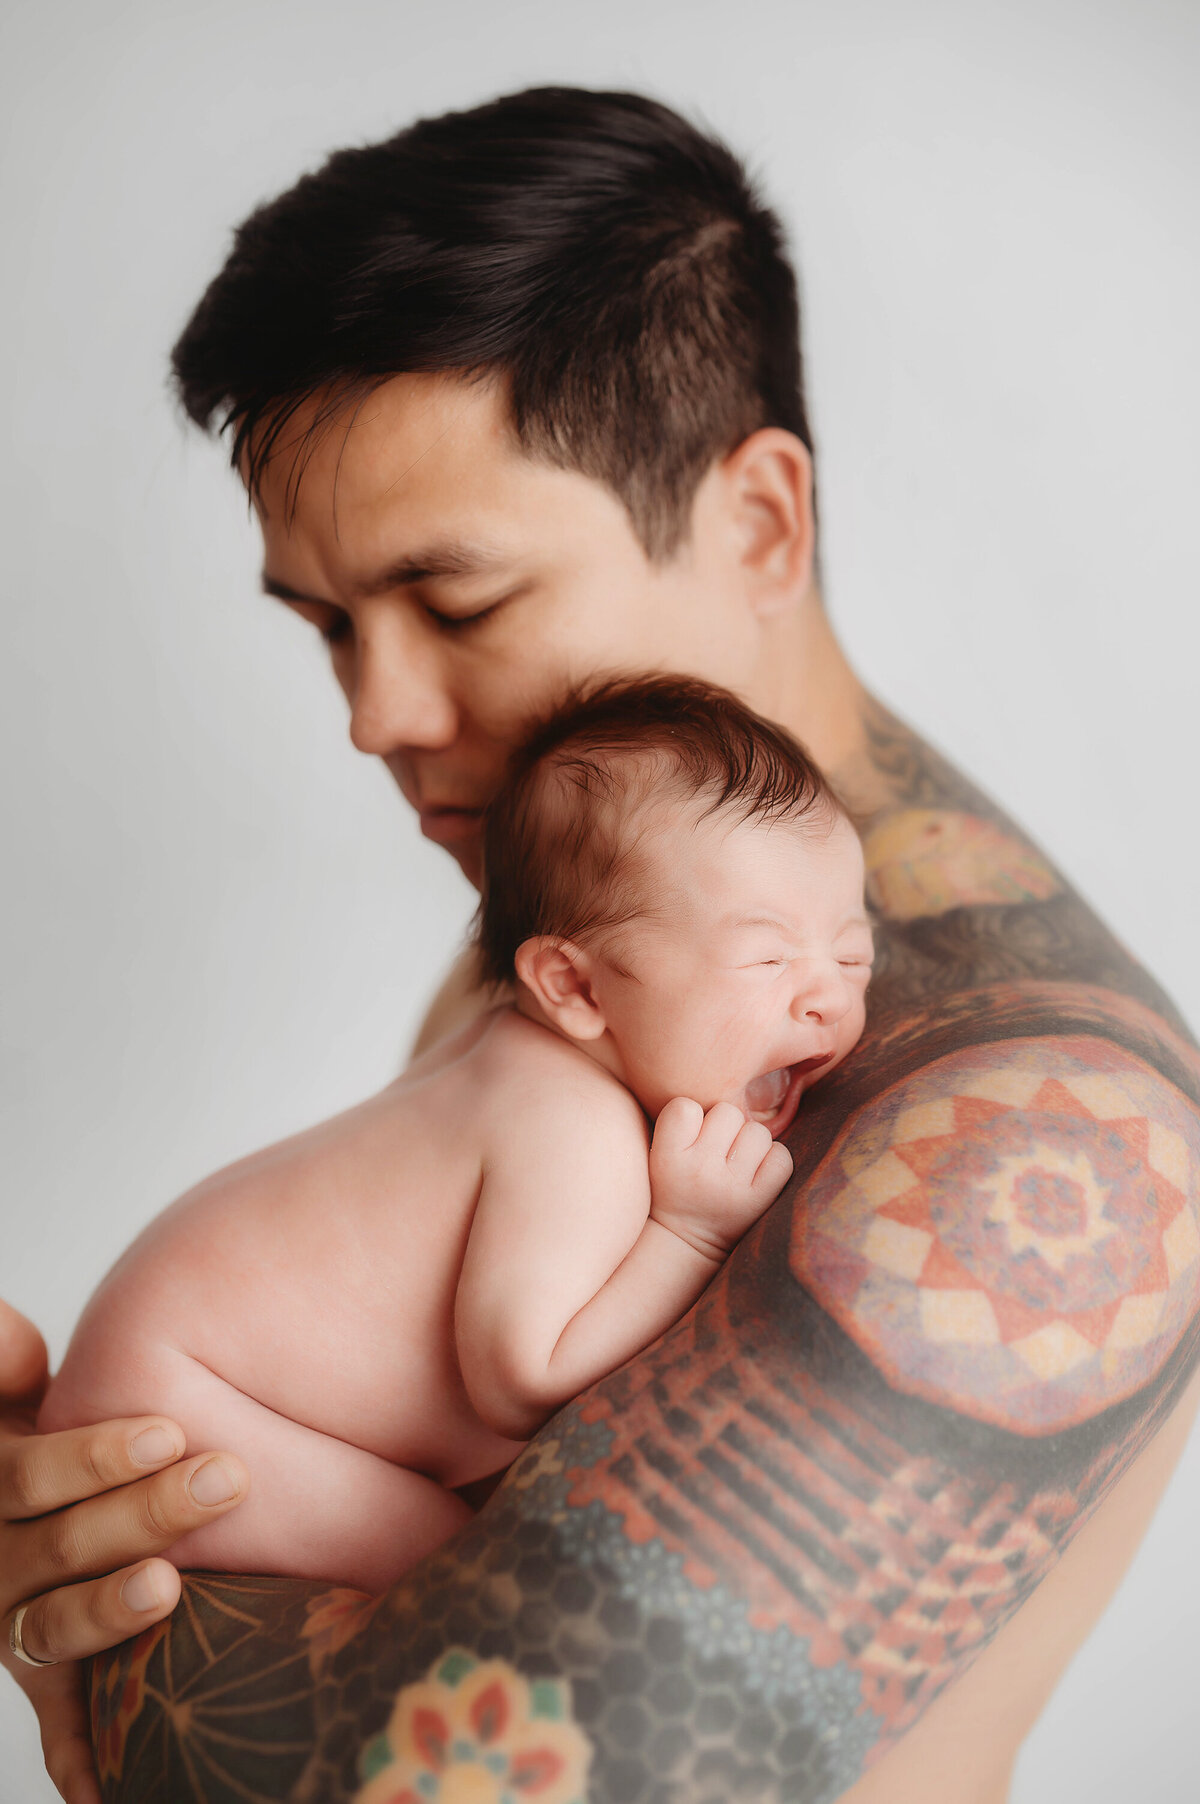 Father poses with his infant daughter during Newborn Photos in Asheville, NC.